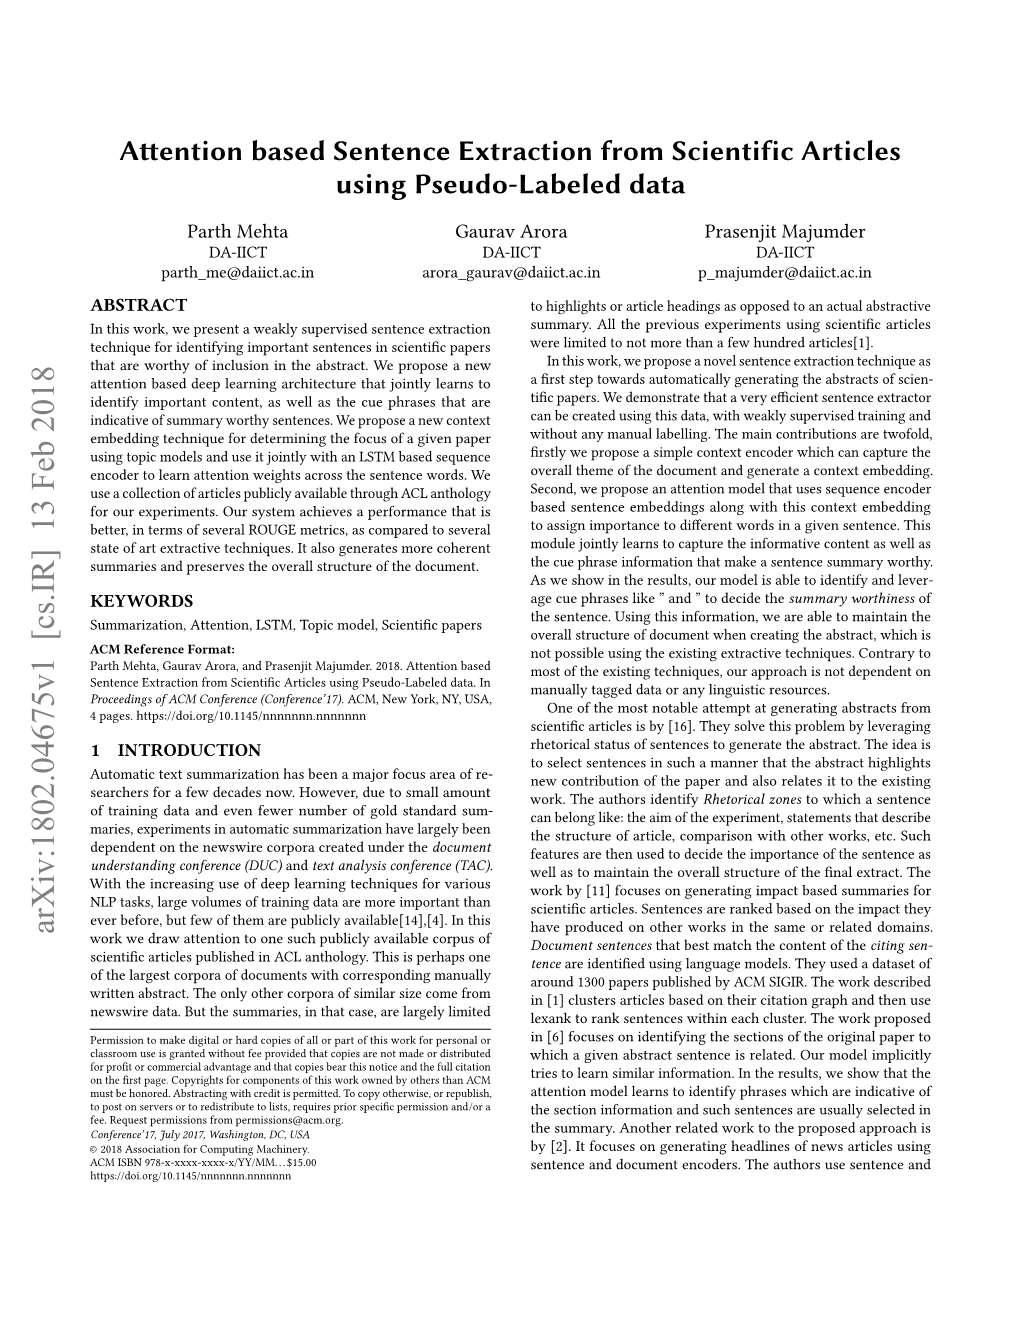 Attention Based Sentence Extraction from Scientific Articles Using Pseudo-Labeled Data